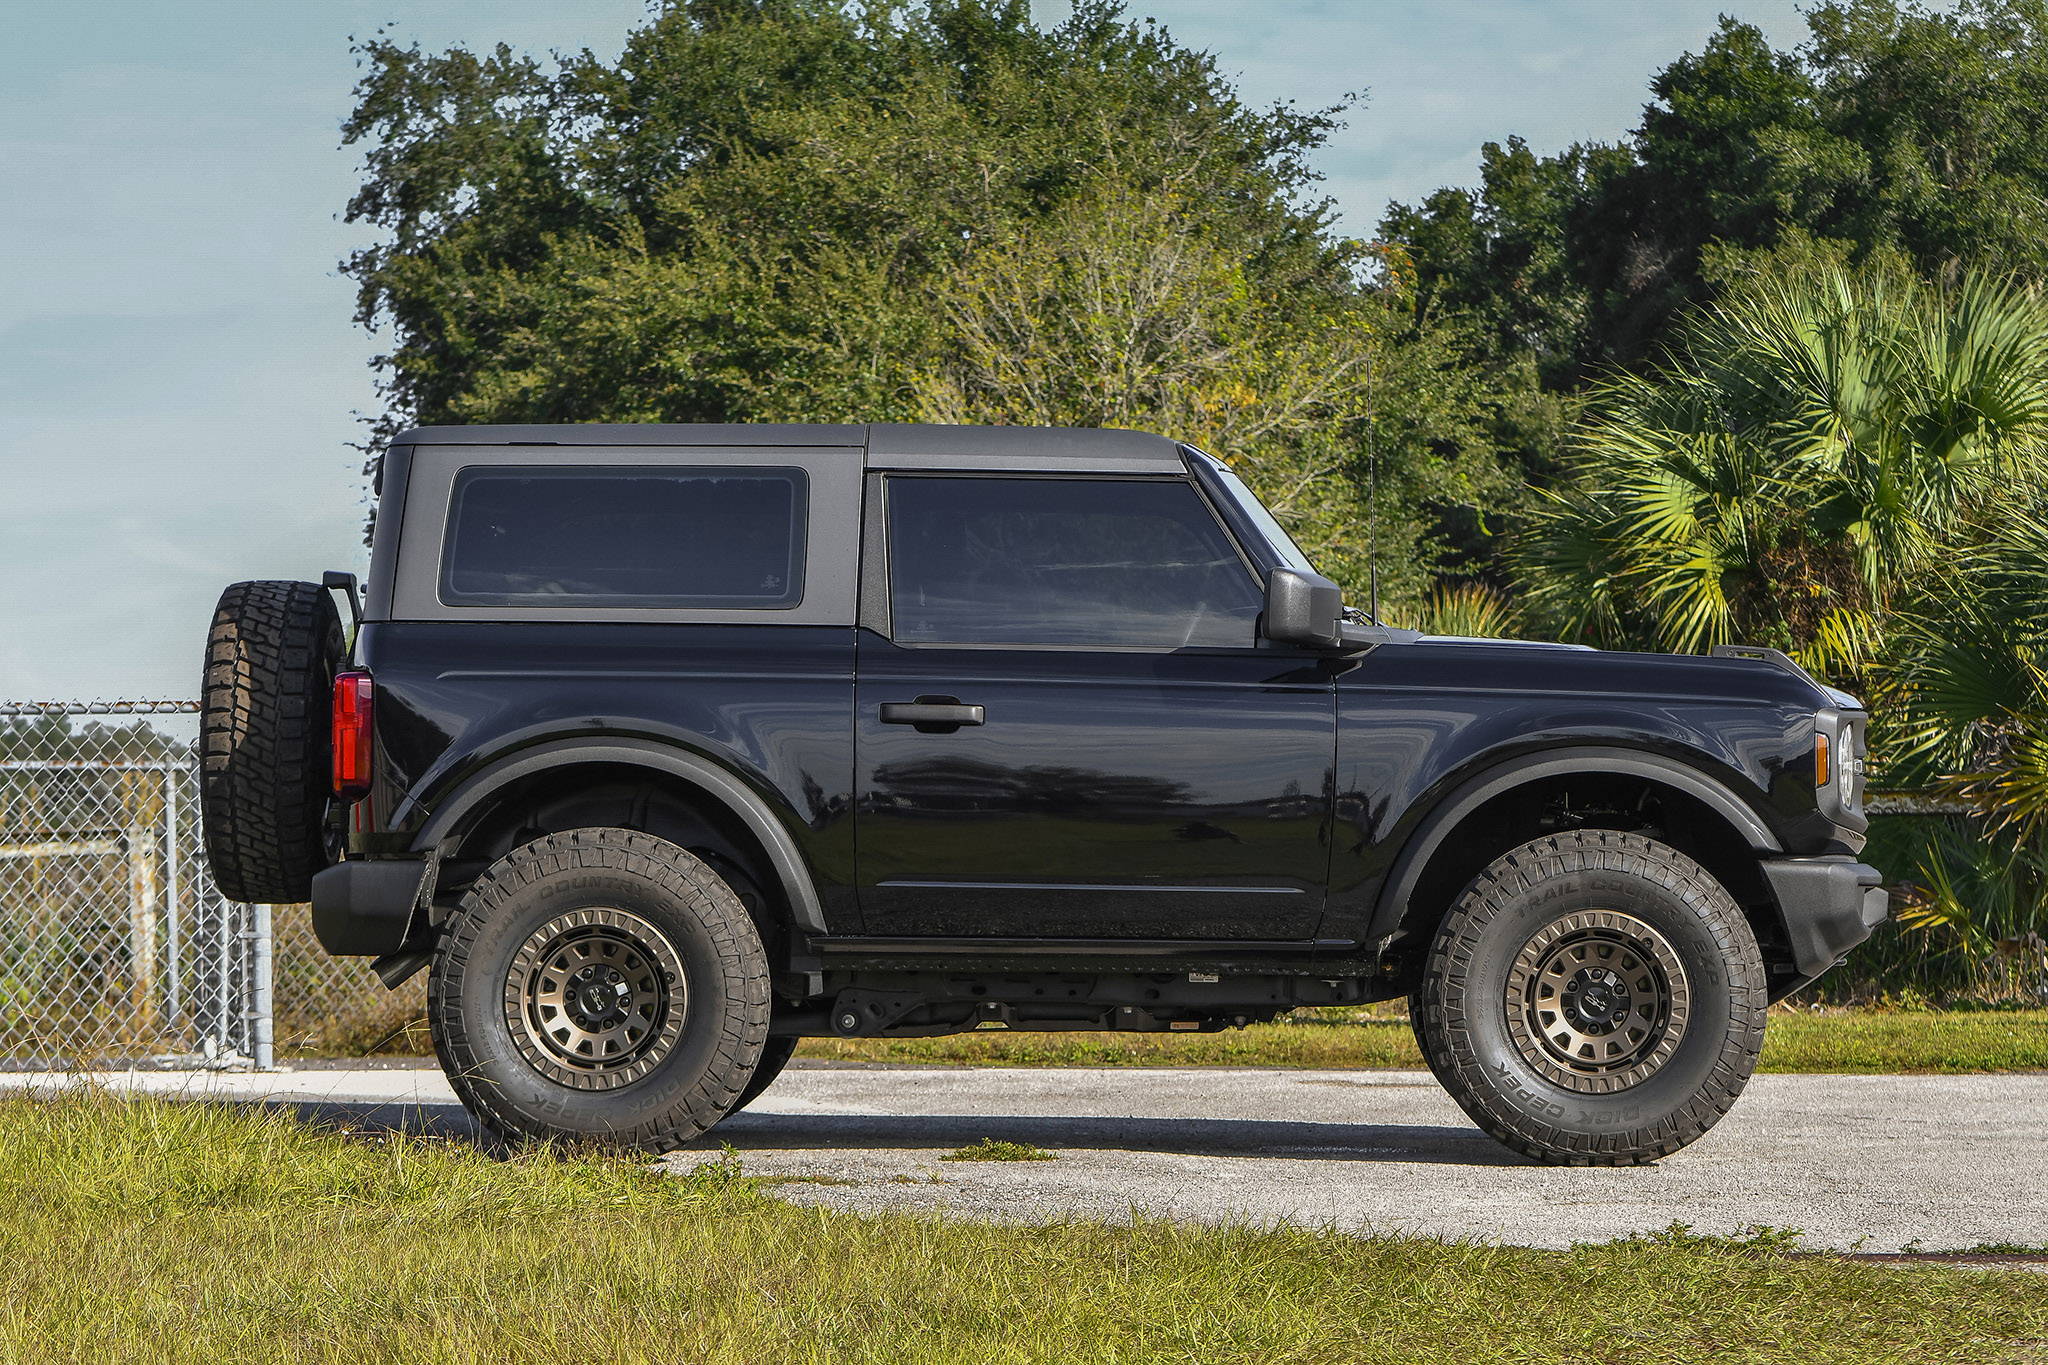 2019 Magnetic Grey Toyota 4-Runner Lifted with the HD Off-Road Overland Sector Venture Wheels in 17x9.0 in All Satin Black